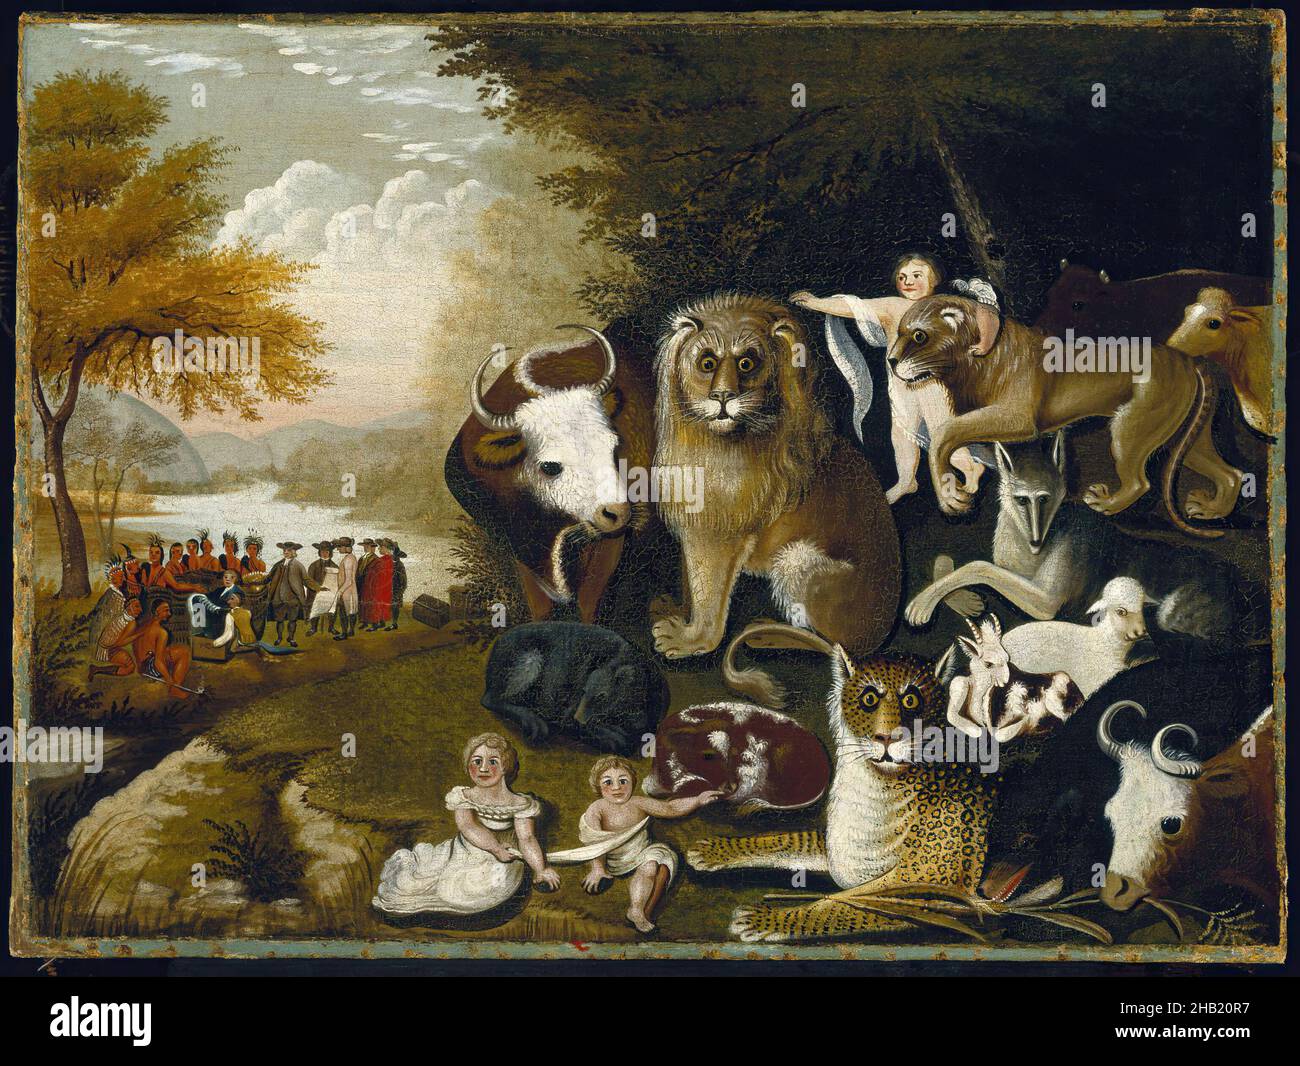 The Peaceable Kingdom, Edward Hicks, American, 1780-1849, Oil on canvas, ca. 1833-1834, 17 7/16 x 23 9/16 in., 44.3 x 59.8 cm, animals, babes, beasts, Biblical, Book of Isaiah, Cat, Christian, clouds, cow, Crazy Eyes, Eden, faith, fantasy, flat, folk, forest, harmony, heaven on earth, innocence, invaders, Lion, naive, nature, painting, parable, peace, Plain style, preaching, Quaker, religious, religious art, settlers, sky, The Lion and Lamb, theology, tolerance, Tree, trees, wildlife, William Penn Stock Photo